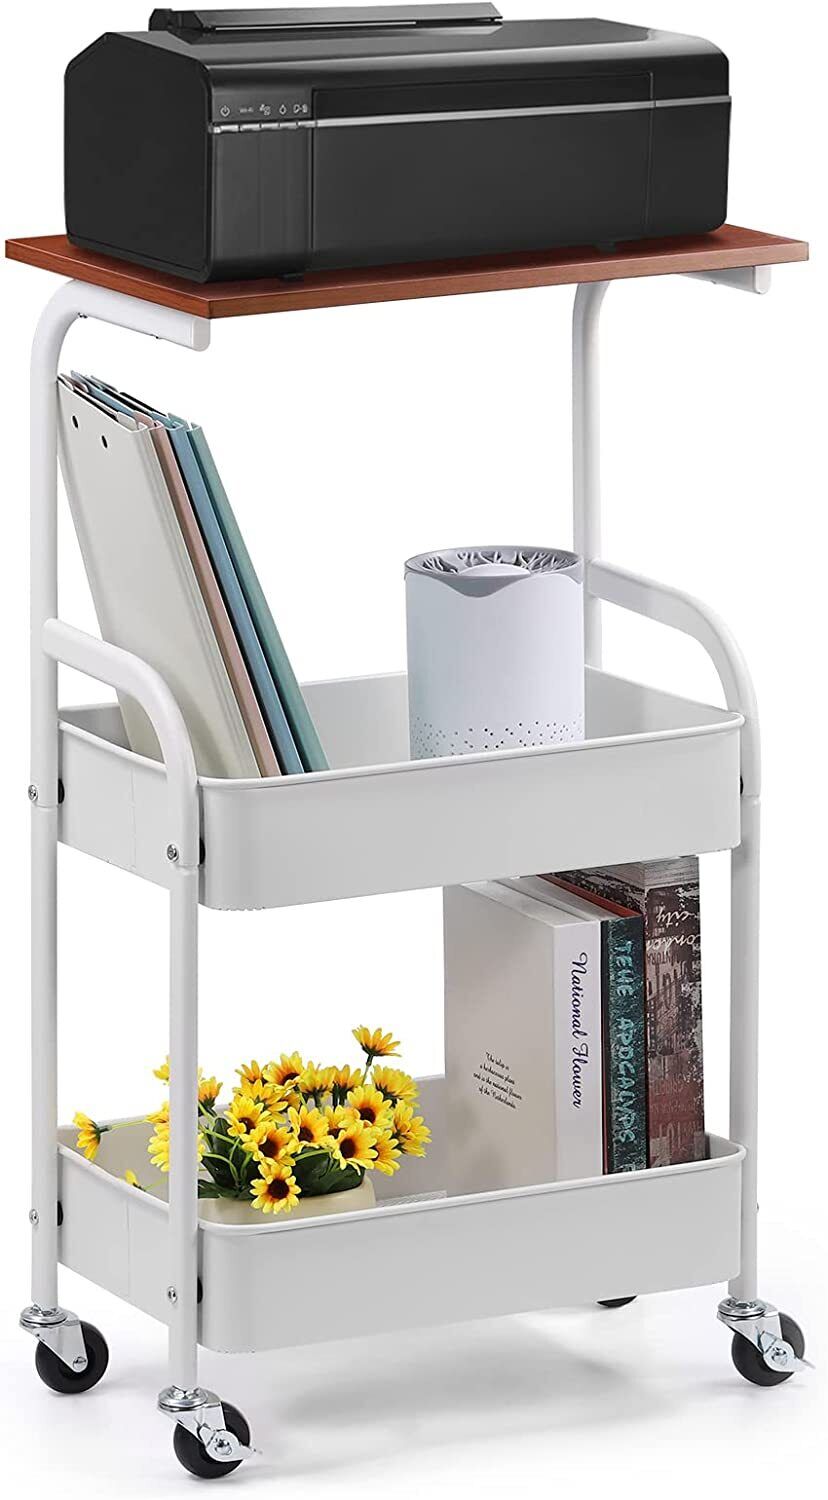 3 Tier Printer Table on Wheels Rolling Cart with Storage Shelves for Printer Fax